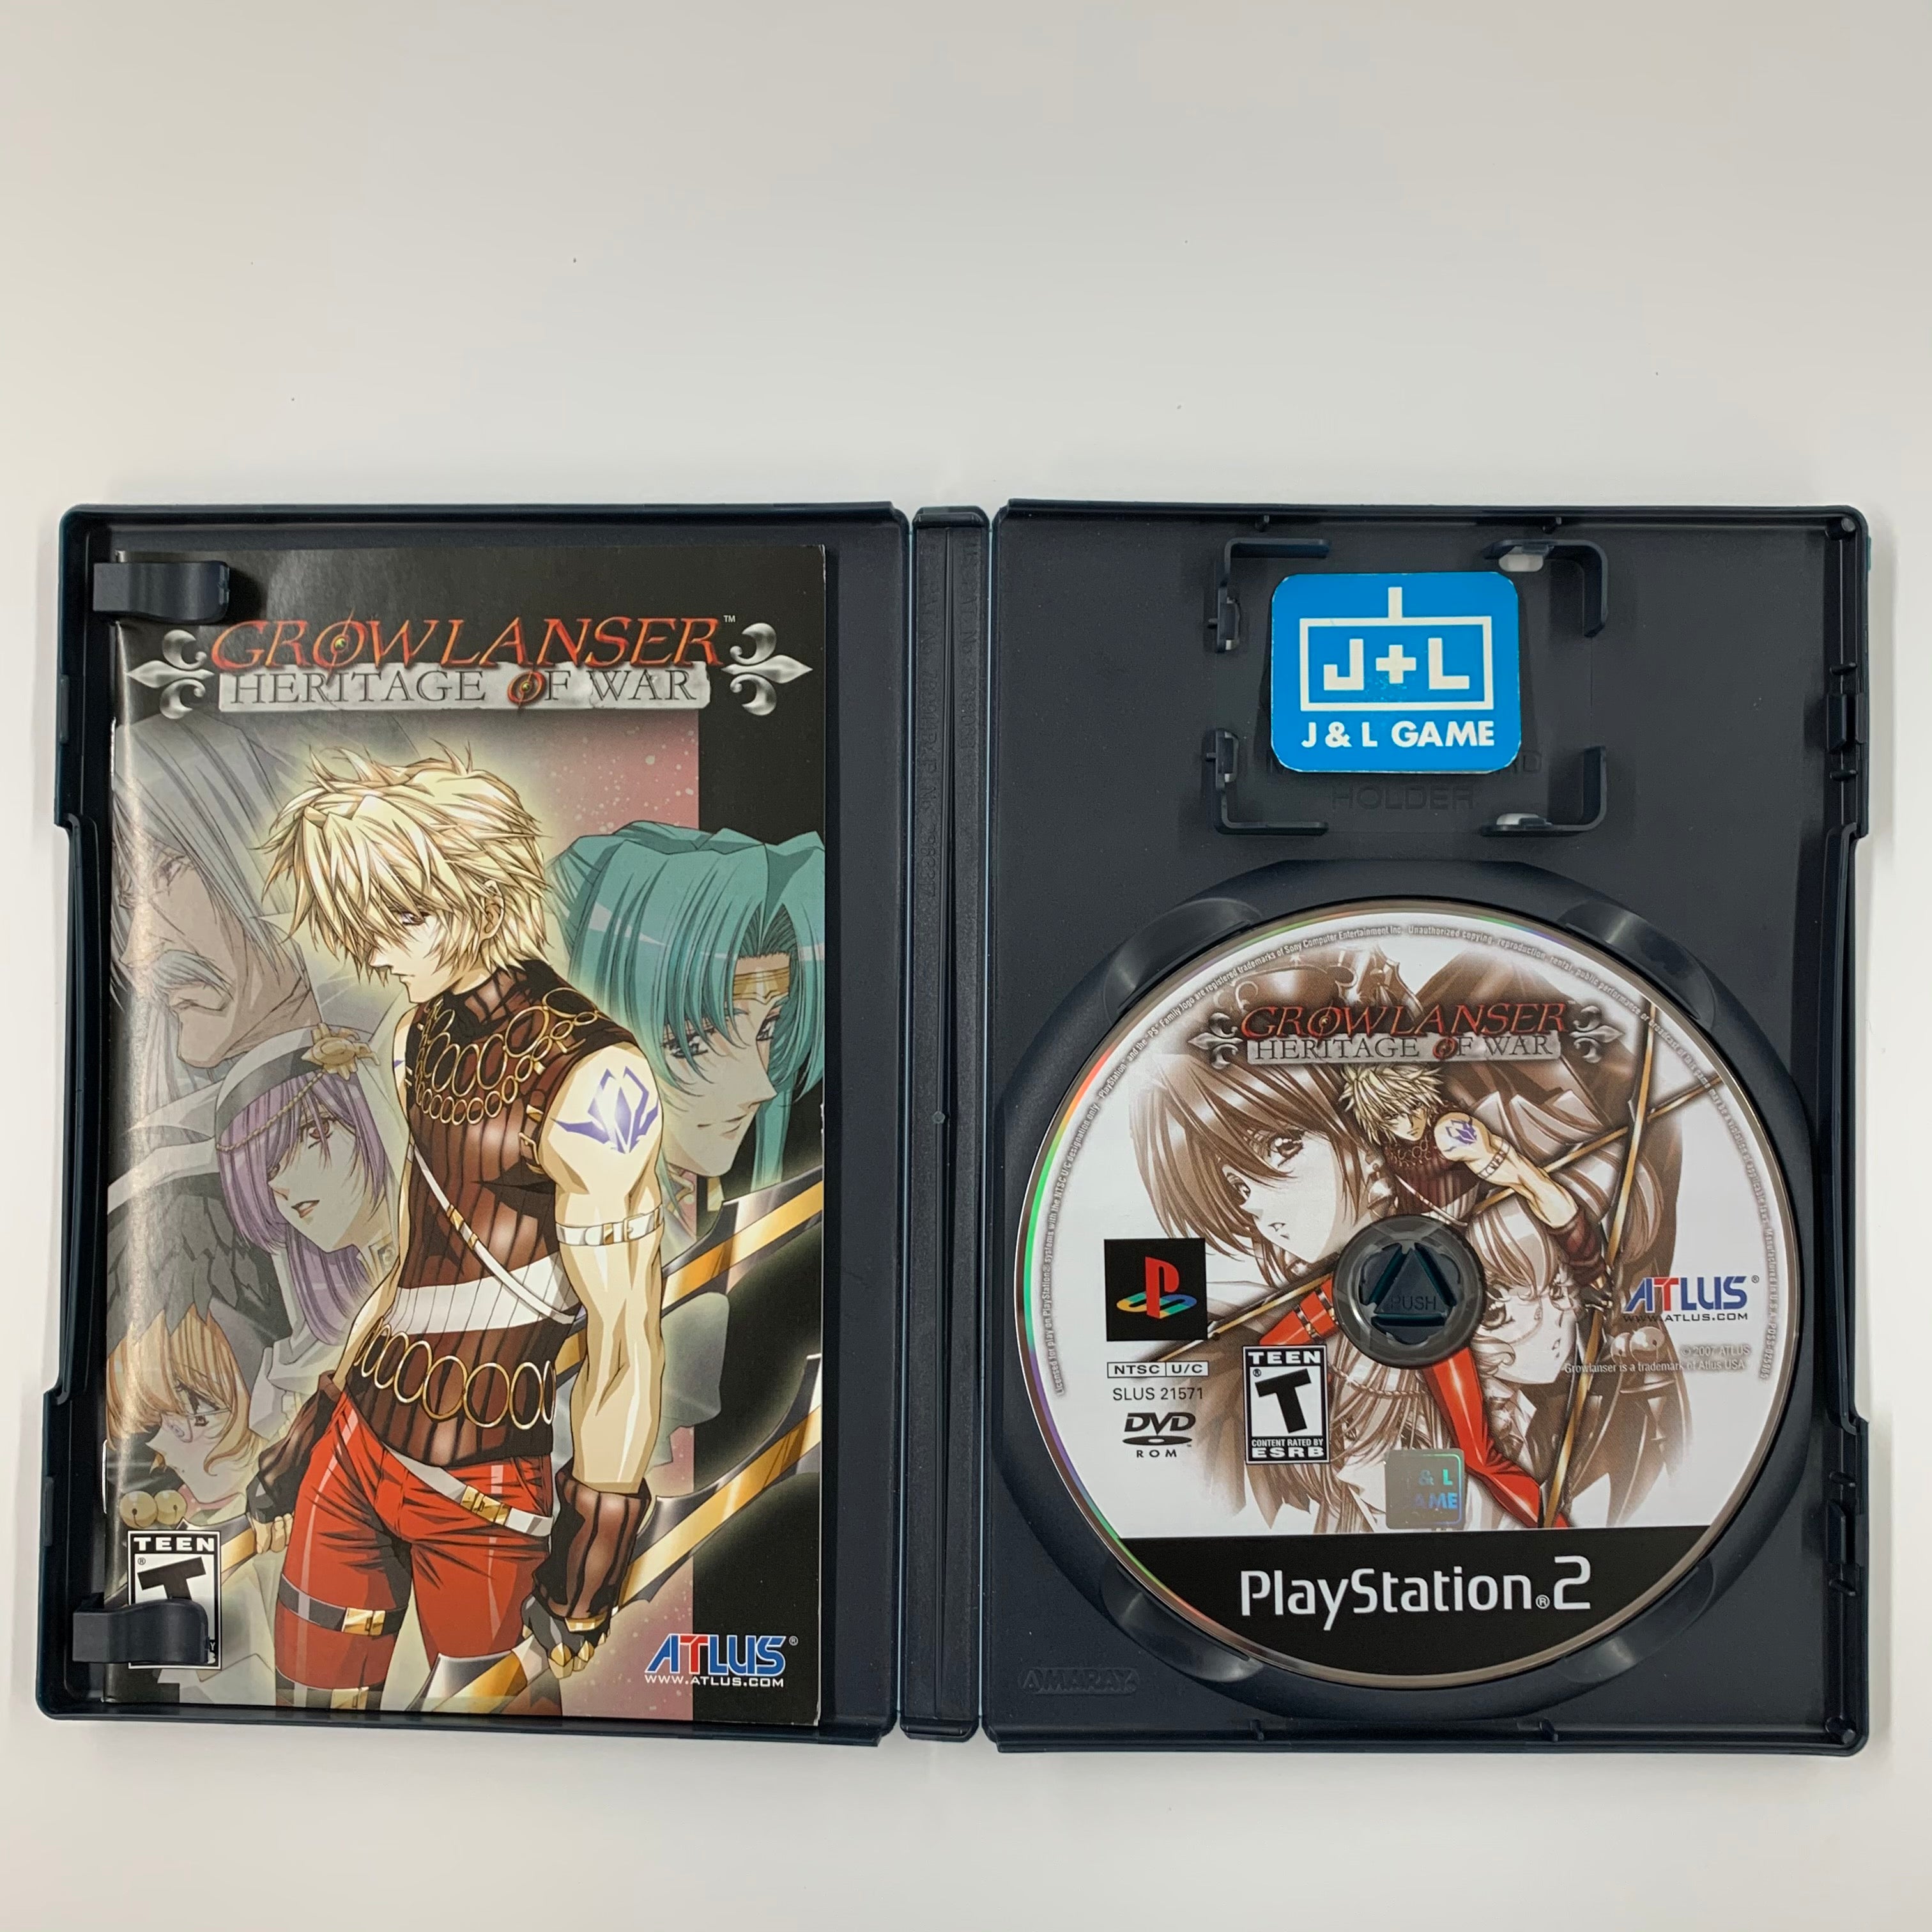 Growlanser: Heritage of War Limited Edition - (PS2) PlayStation 2 [Pre-Owned] Video Games Atlus   